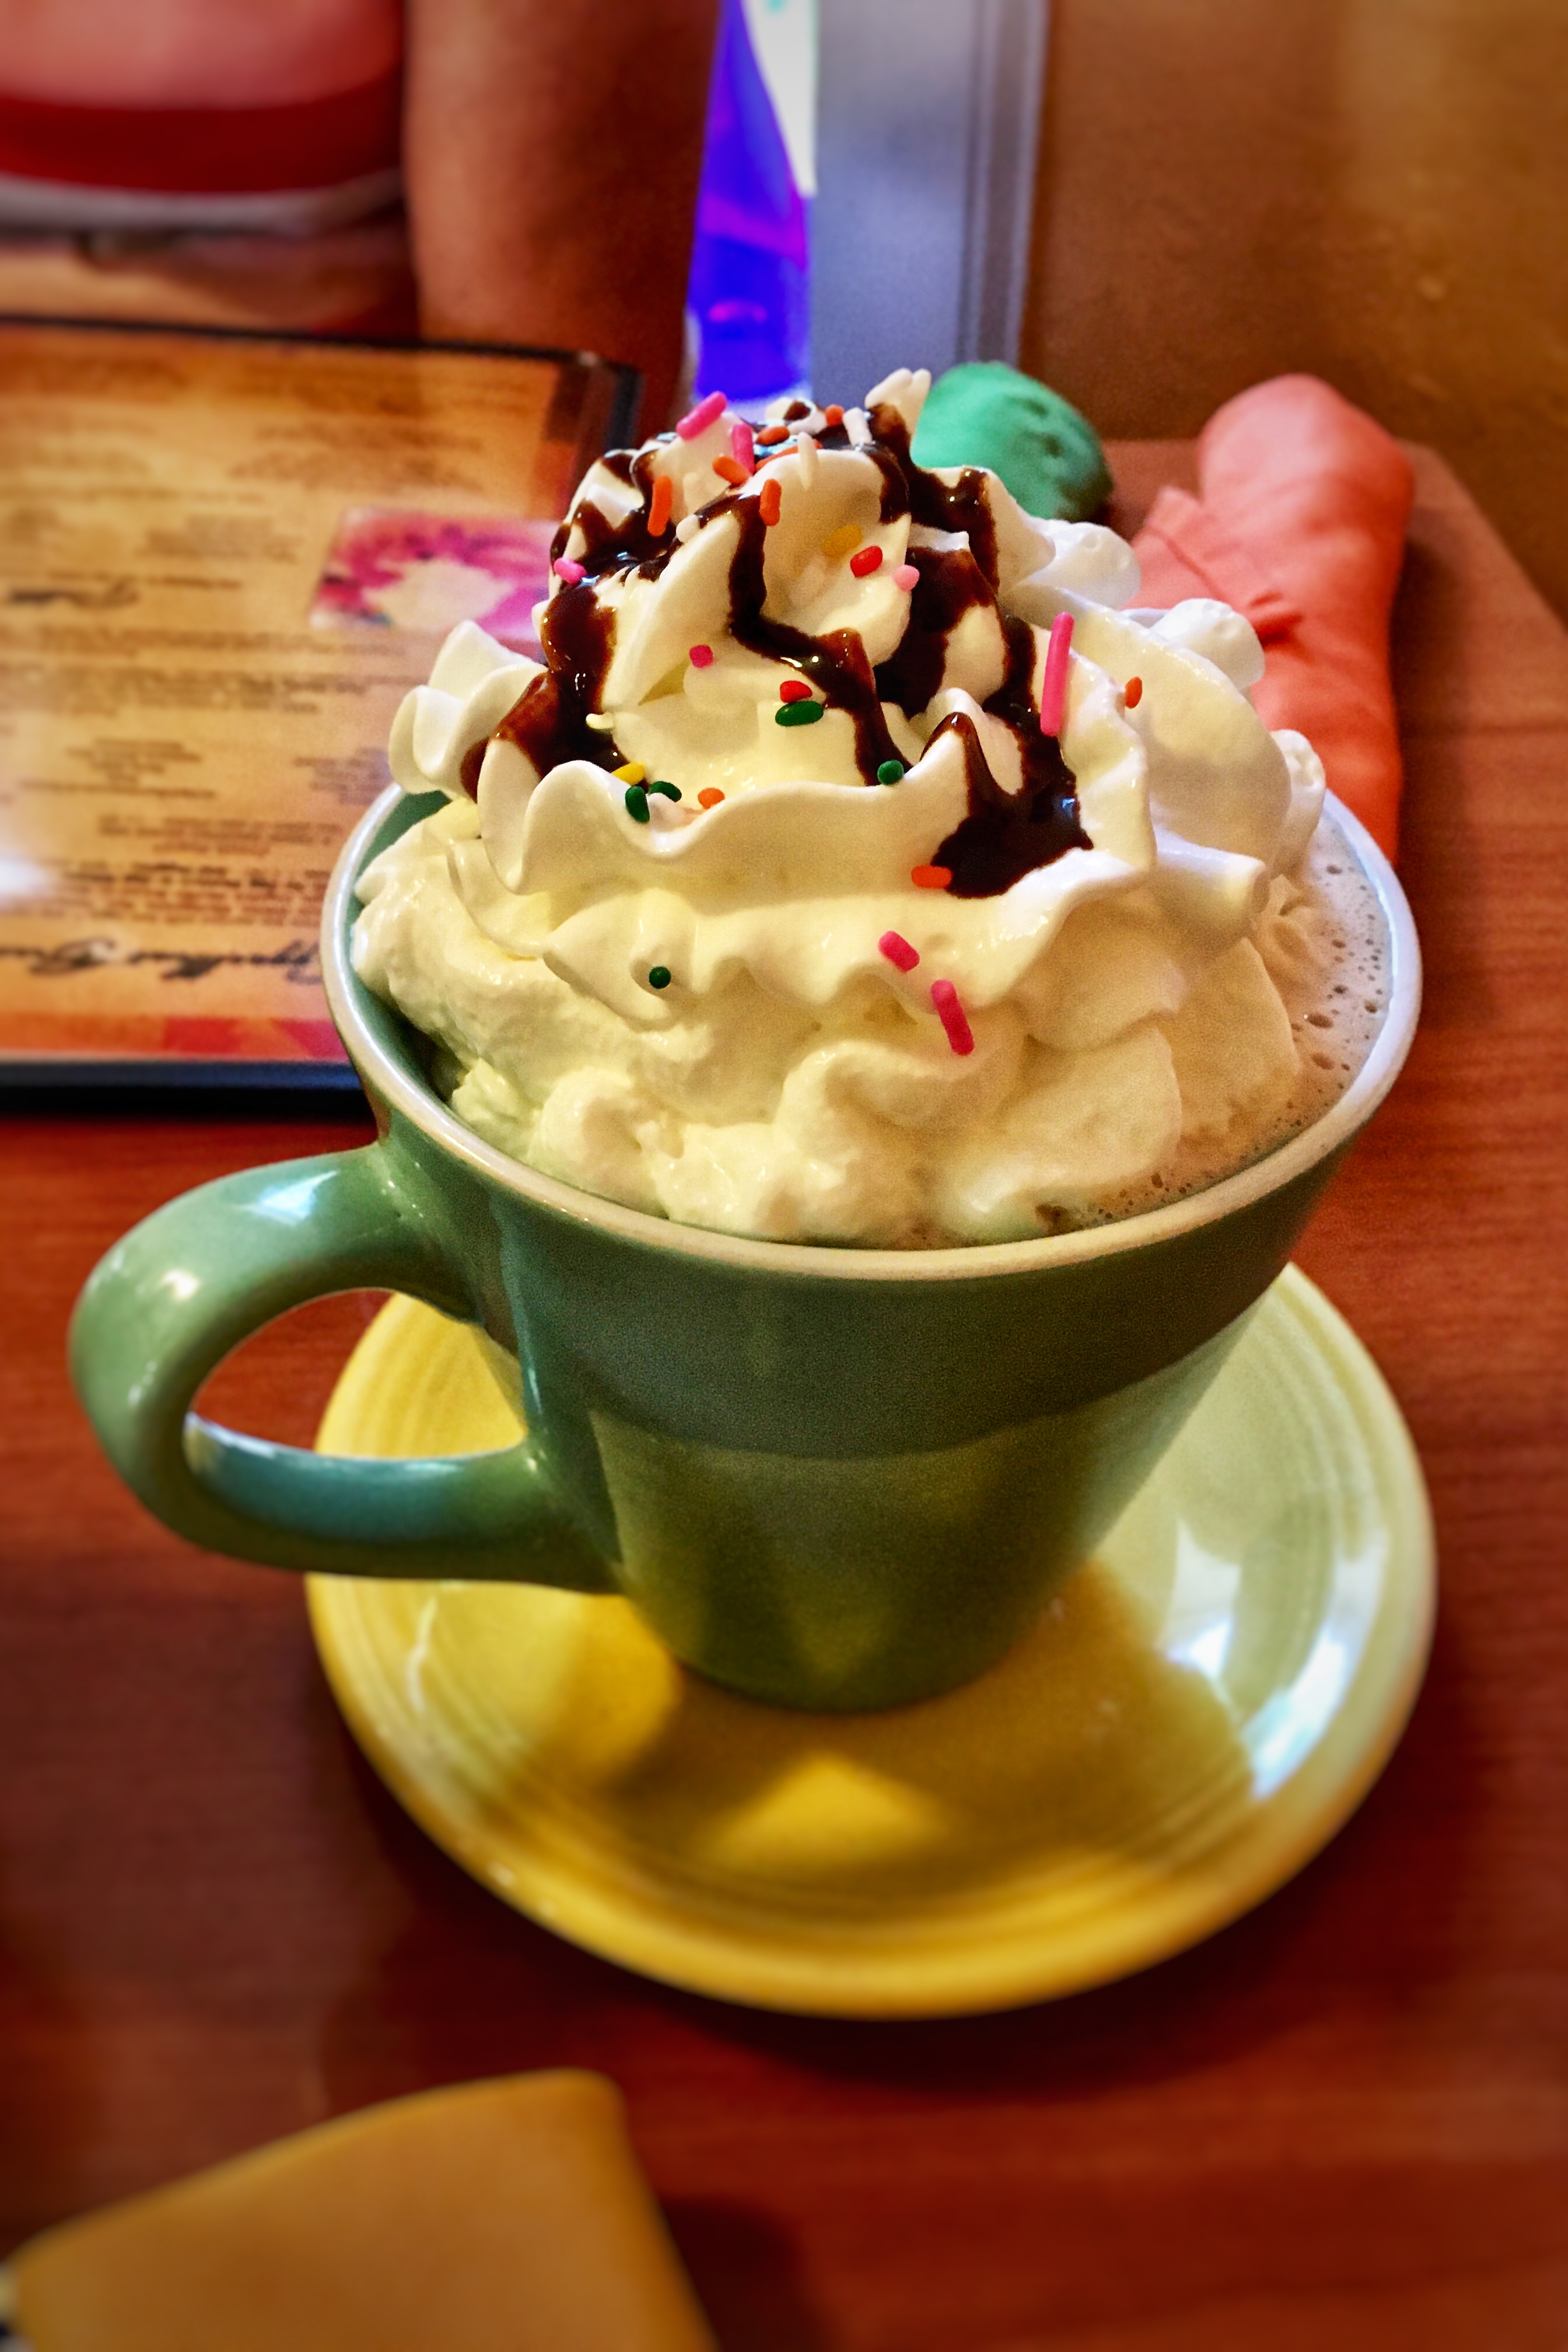 Simply delicous offers a great variety of breakfast. This coffee with cream is very colorful.